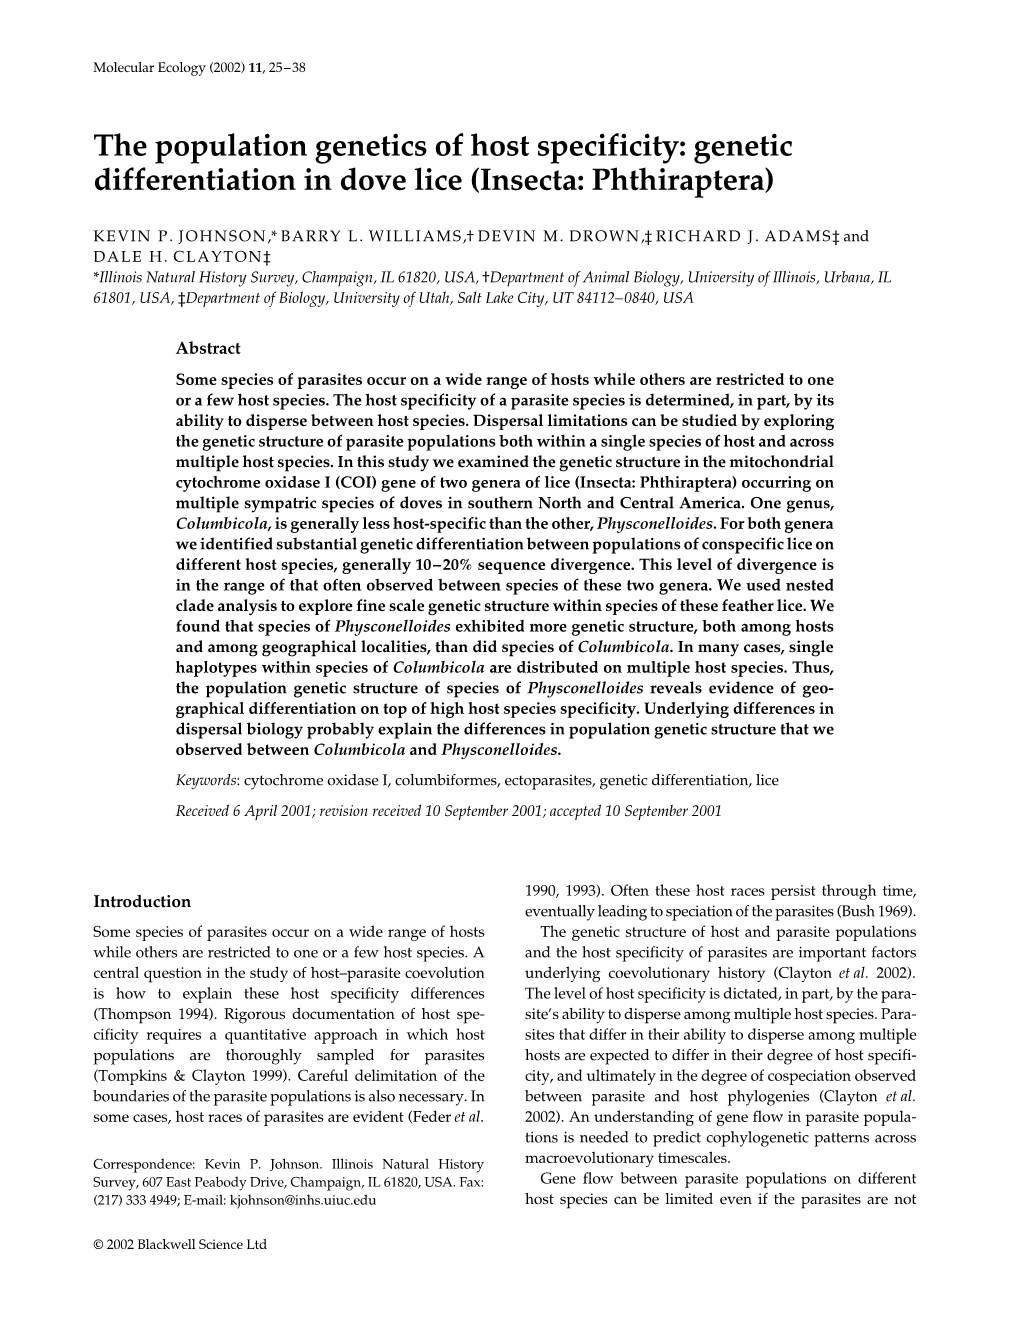 Genetic Differentiation in Dove Lice (Insecta: Phthiraptera)